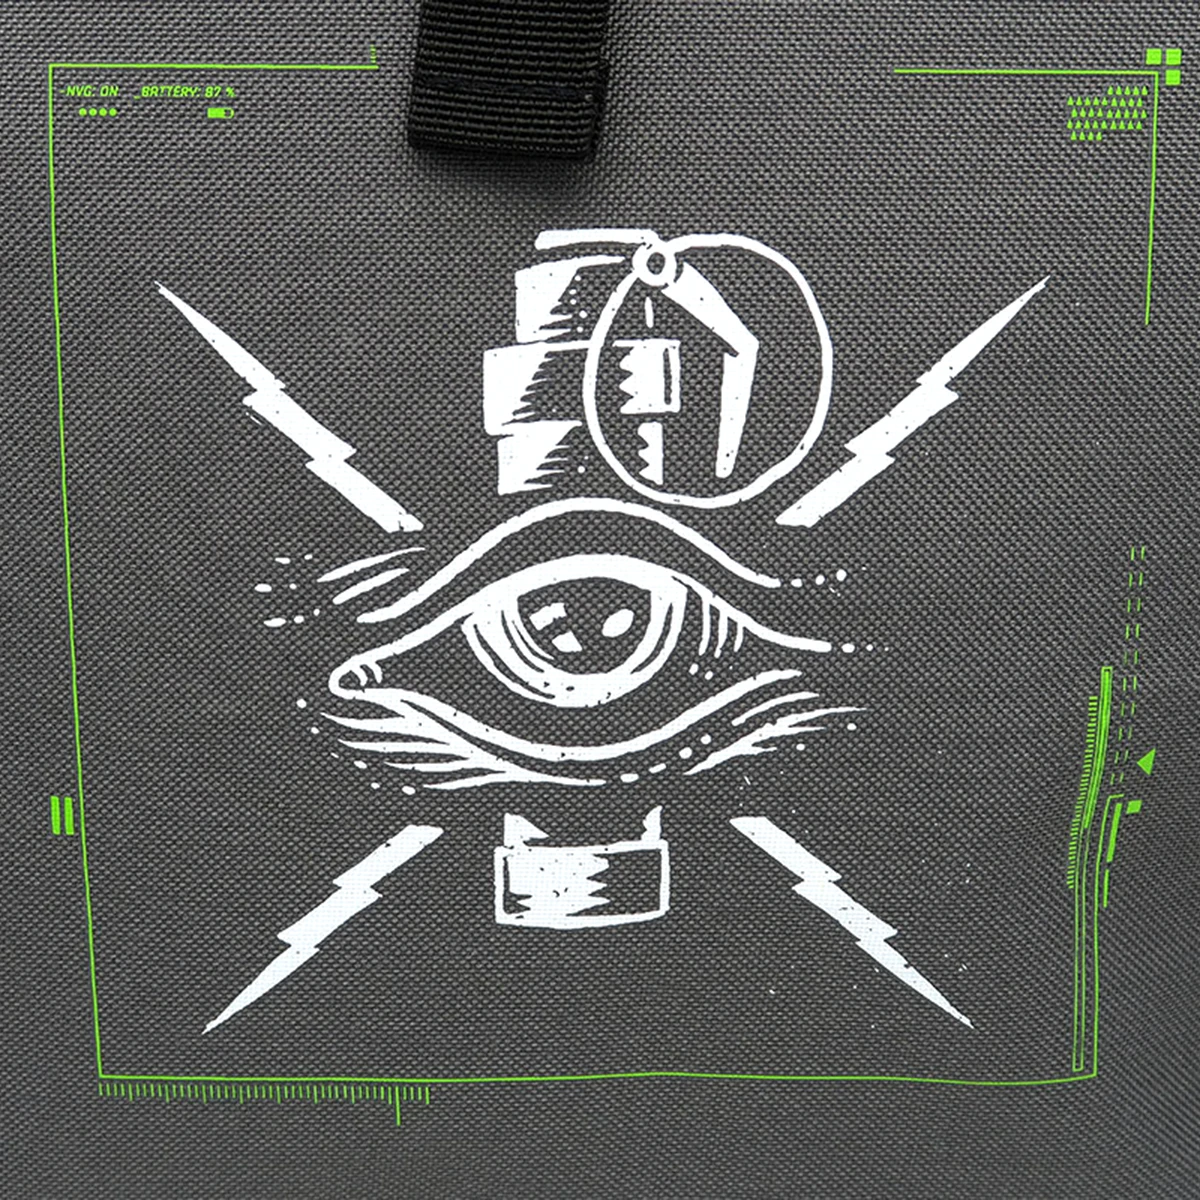 Call of Duty Rolltop Backpack "Blind" Grey Thumbnail 3